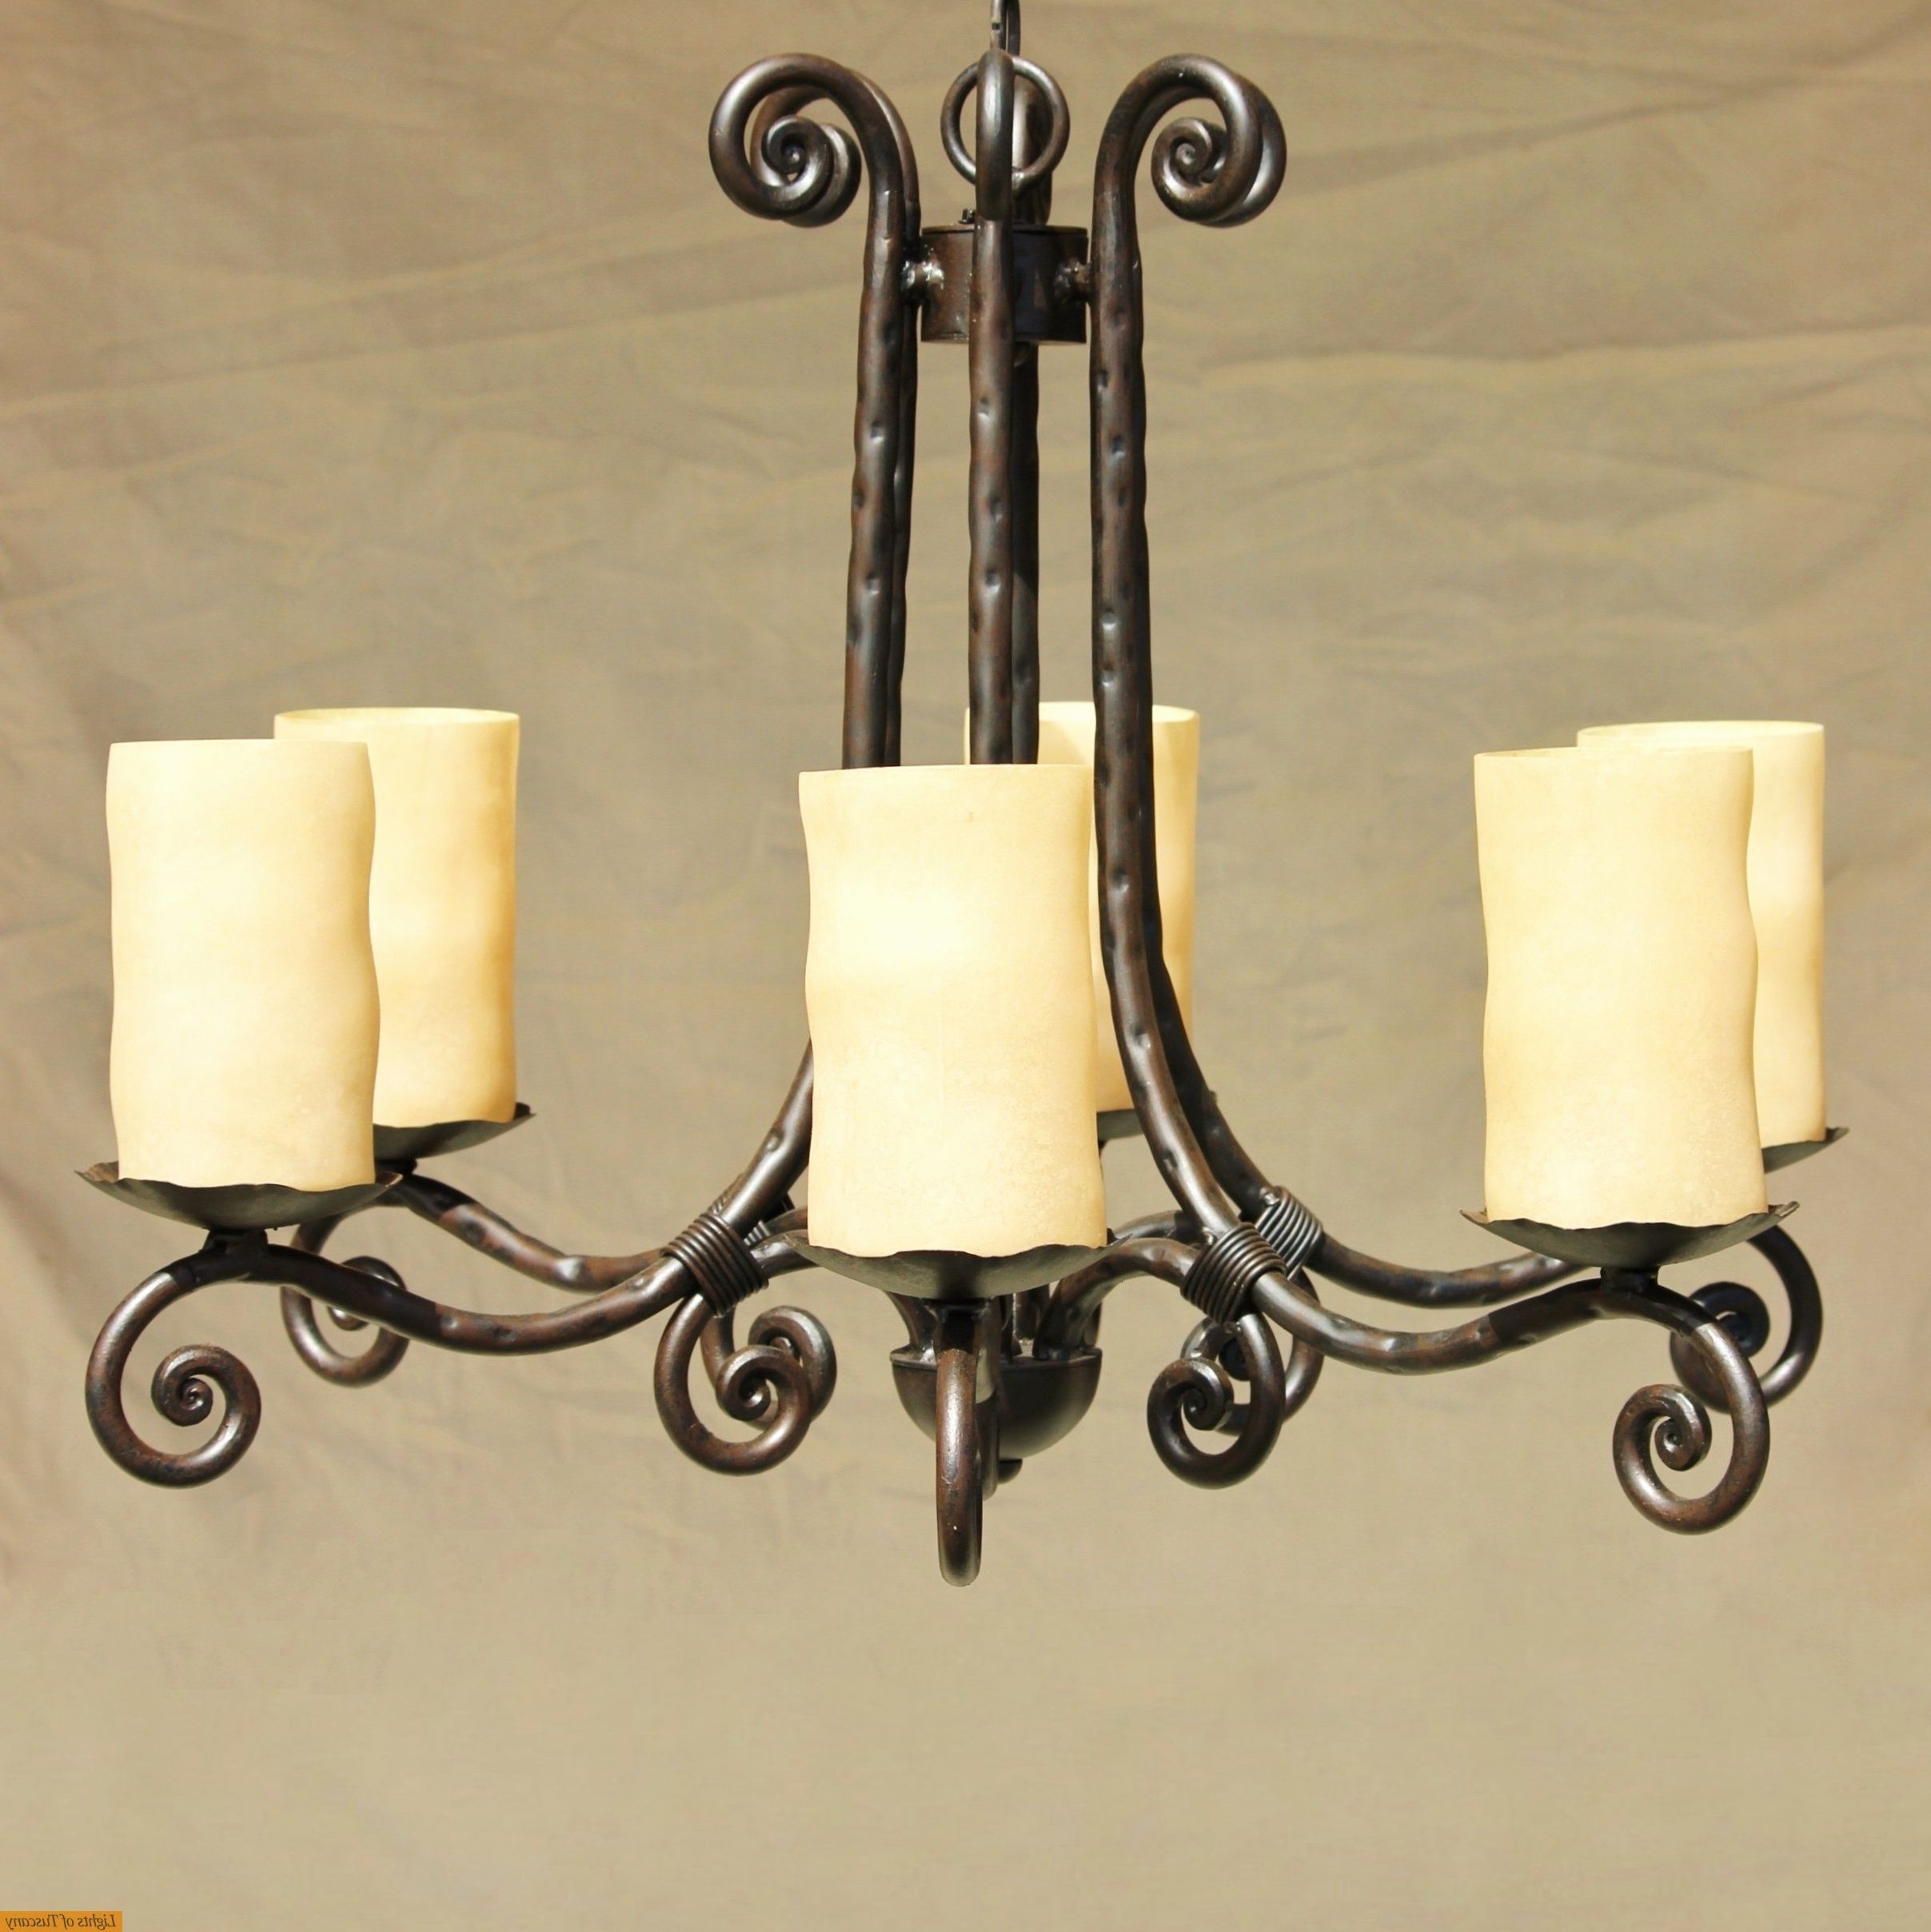 Preferred Stand Up Lights Fresh Chandeliers Design Fabulous Intriguing Tuscan Intended For Stand Up Chandeliers (View 7 of 20)